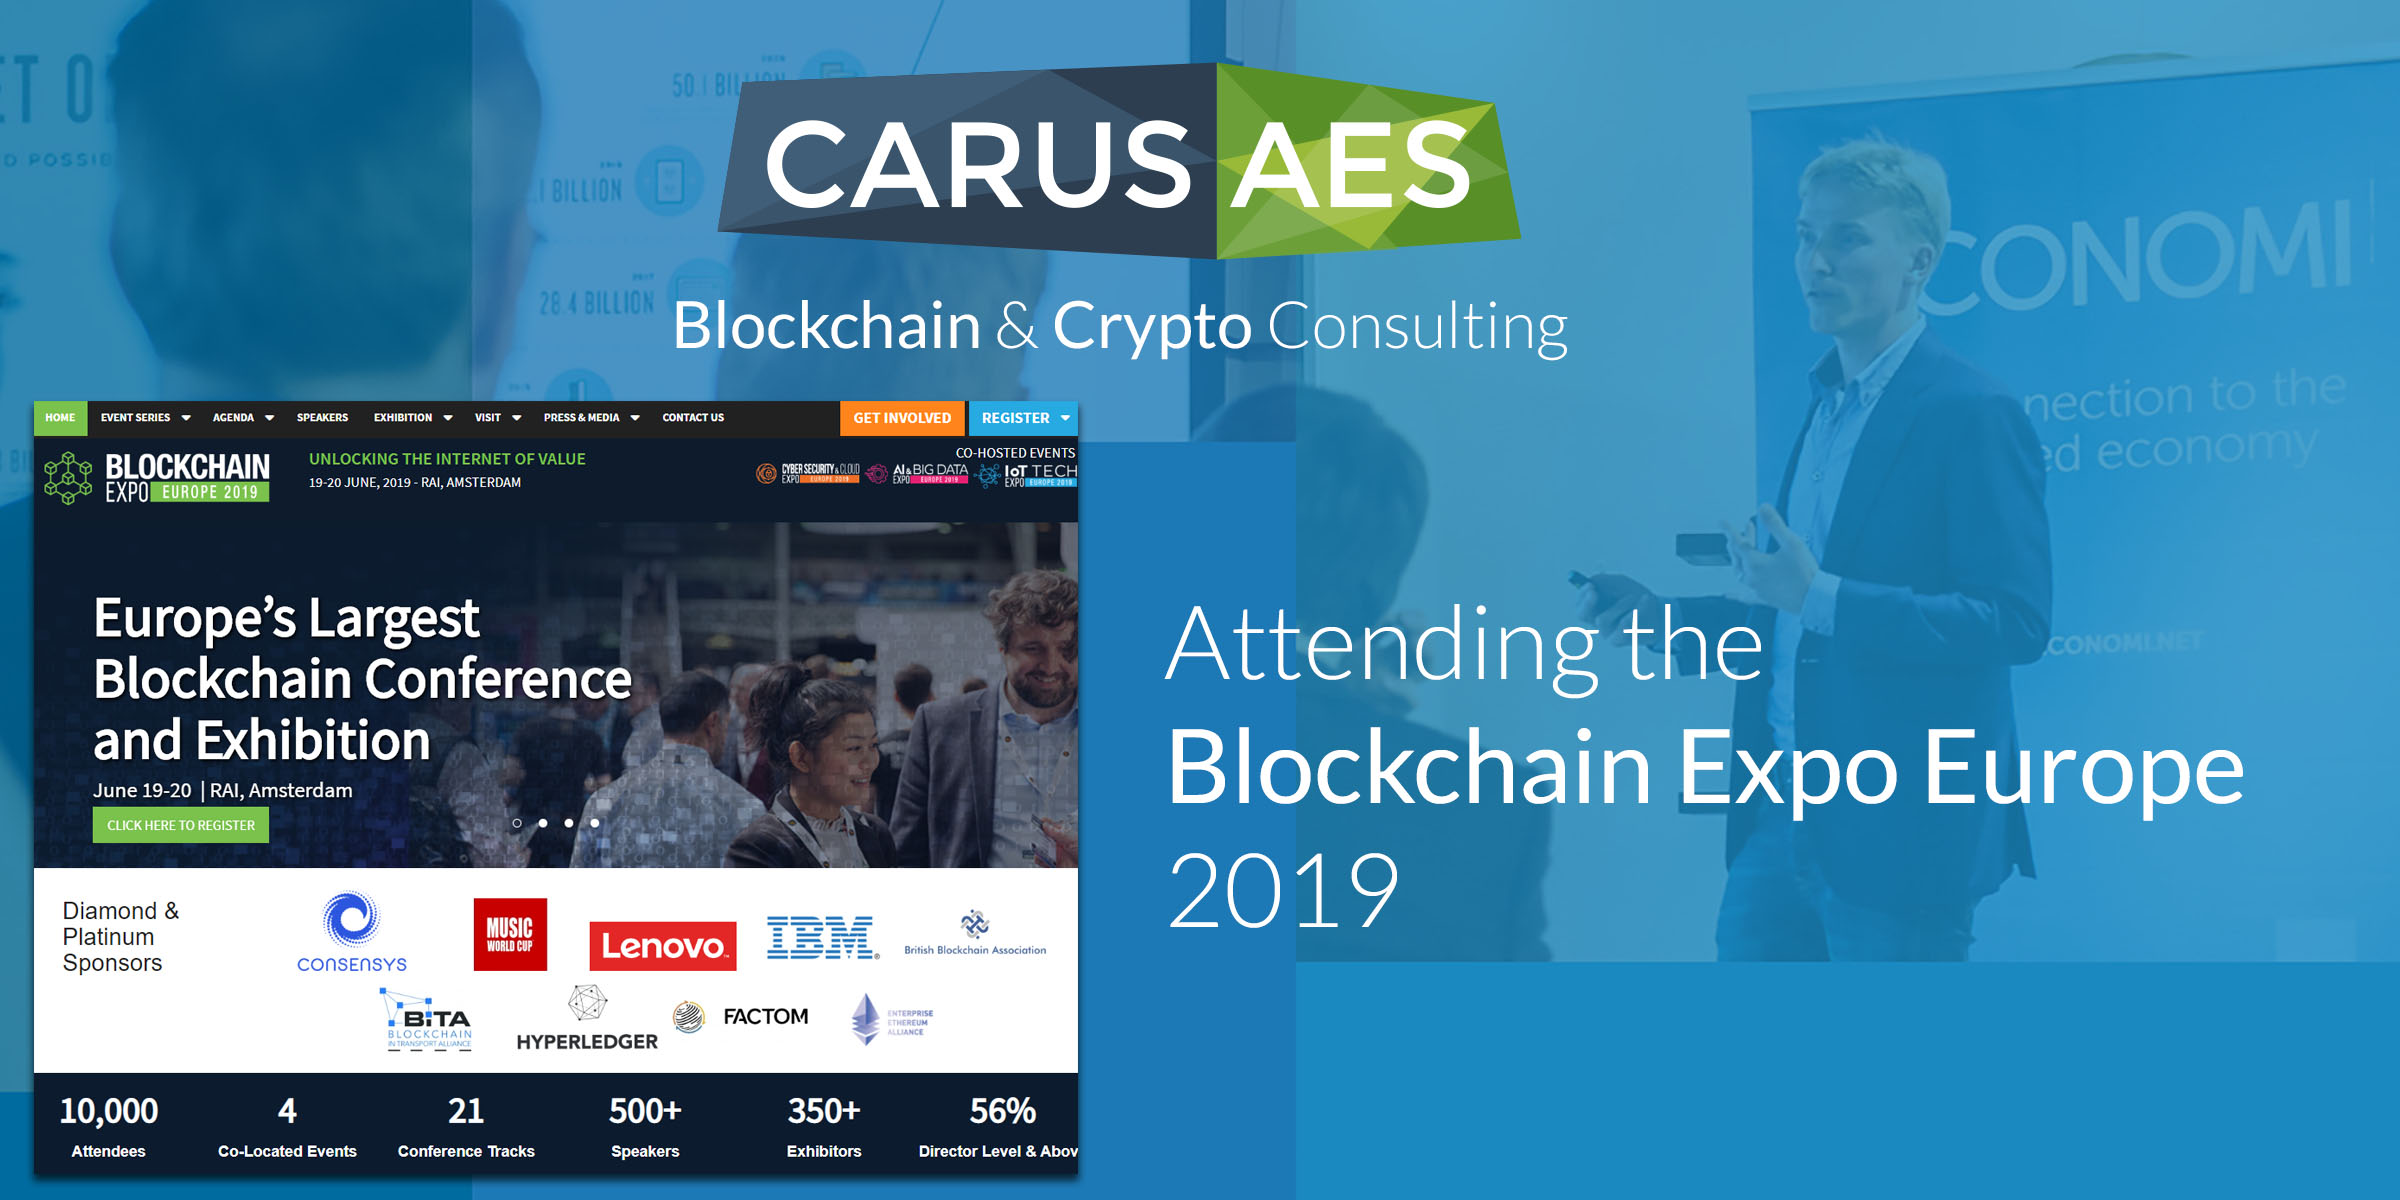 CarusAes and CARUS-AR Attending the Blockchain Expo Europe 2019